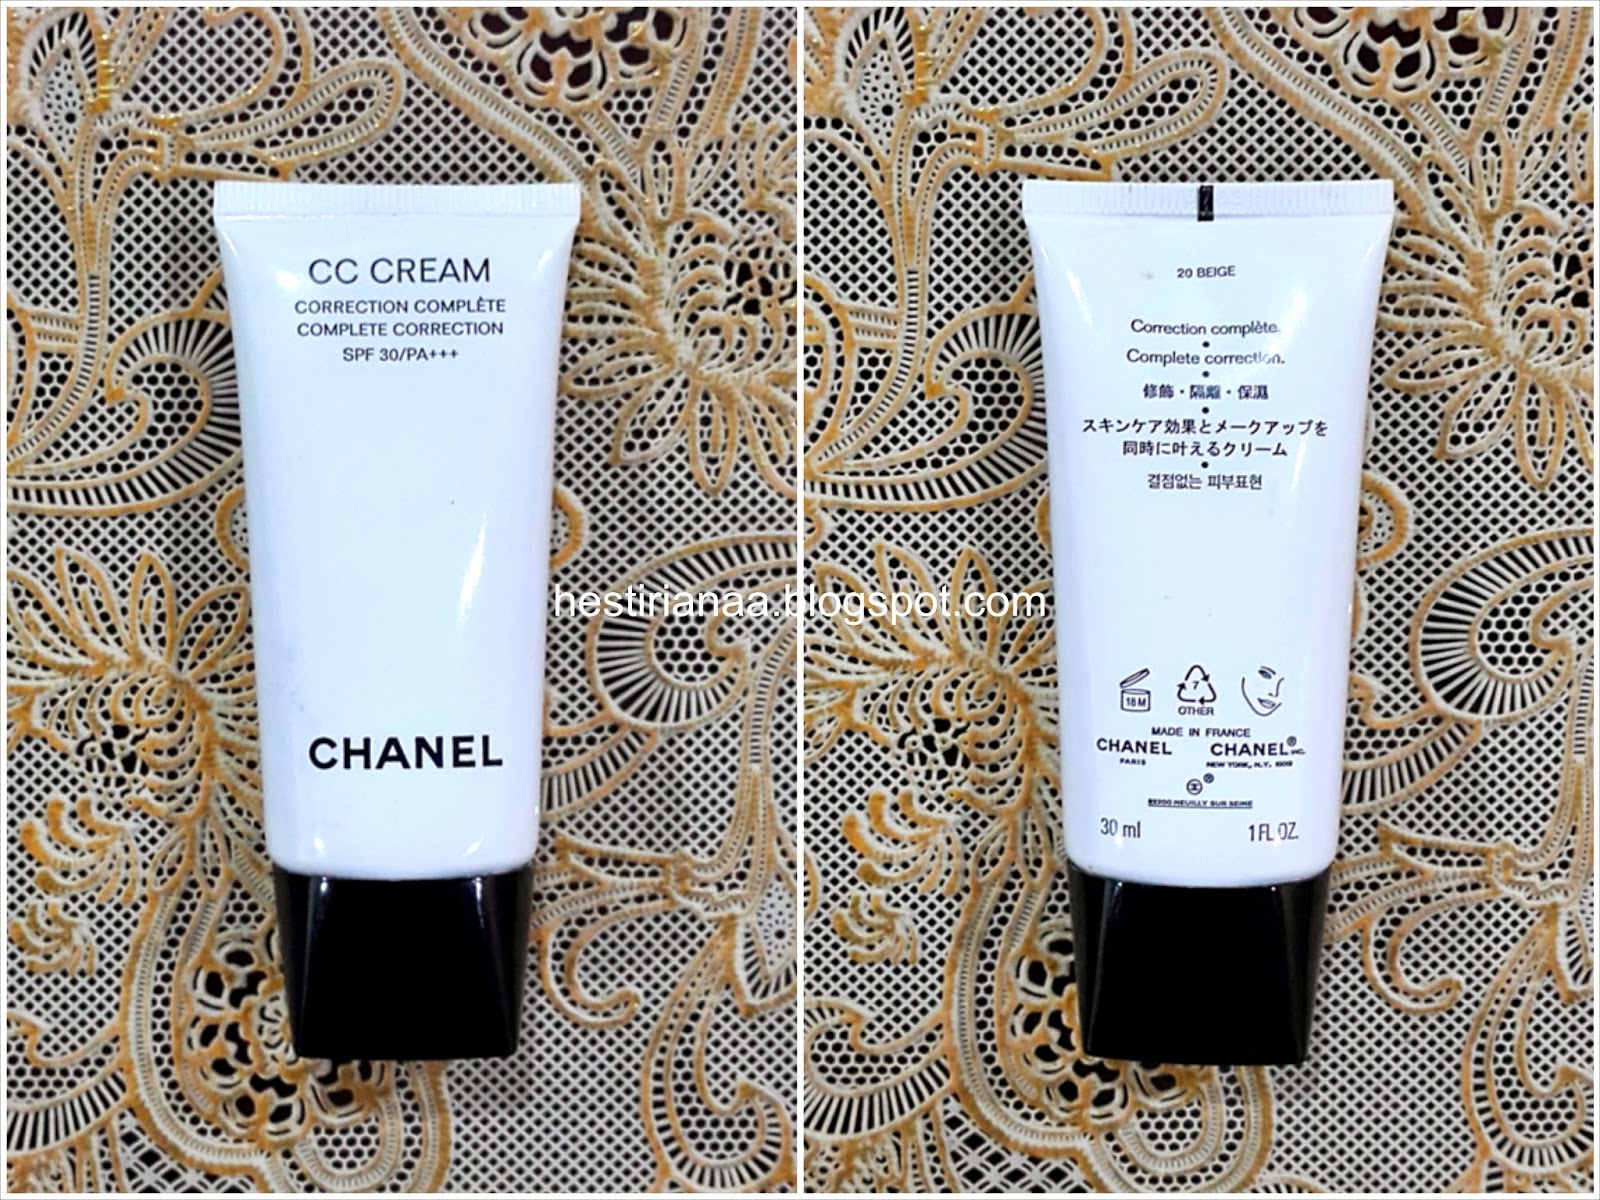 CHANEL New CC Cream, Review and Swatches